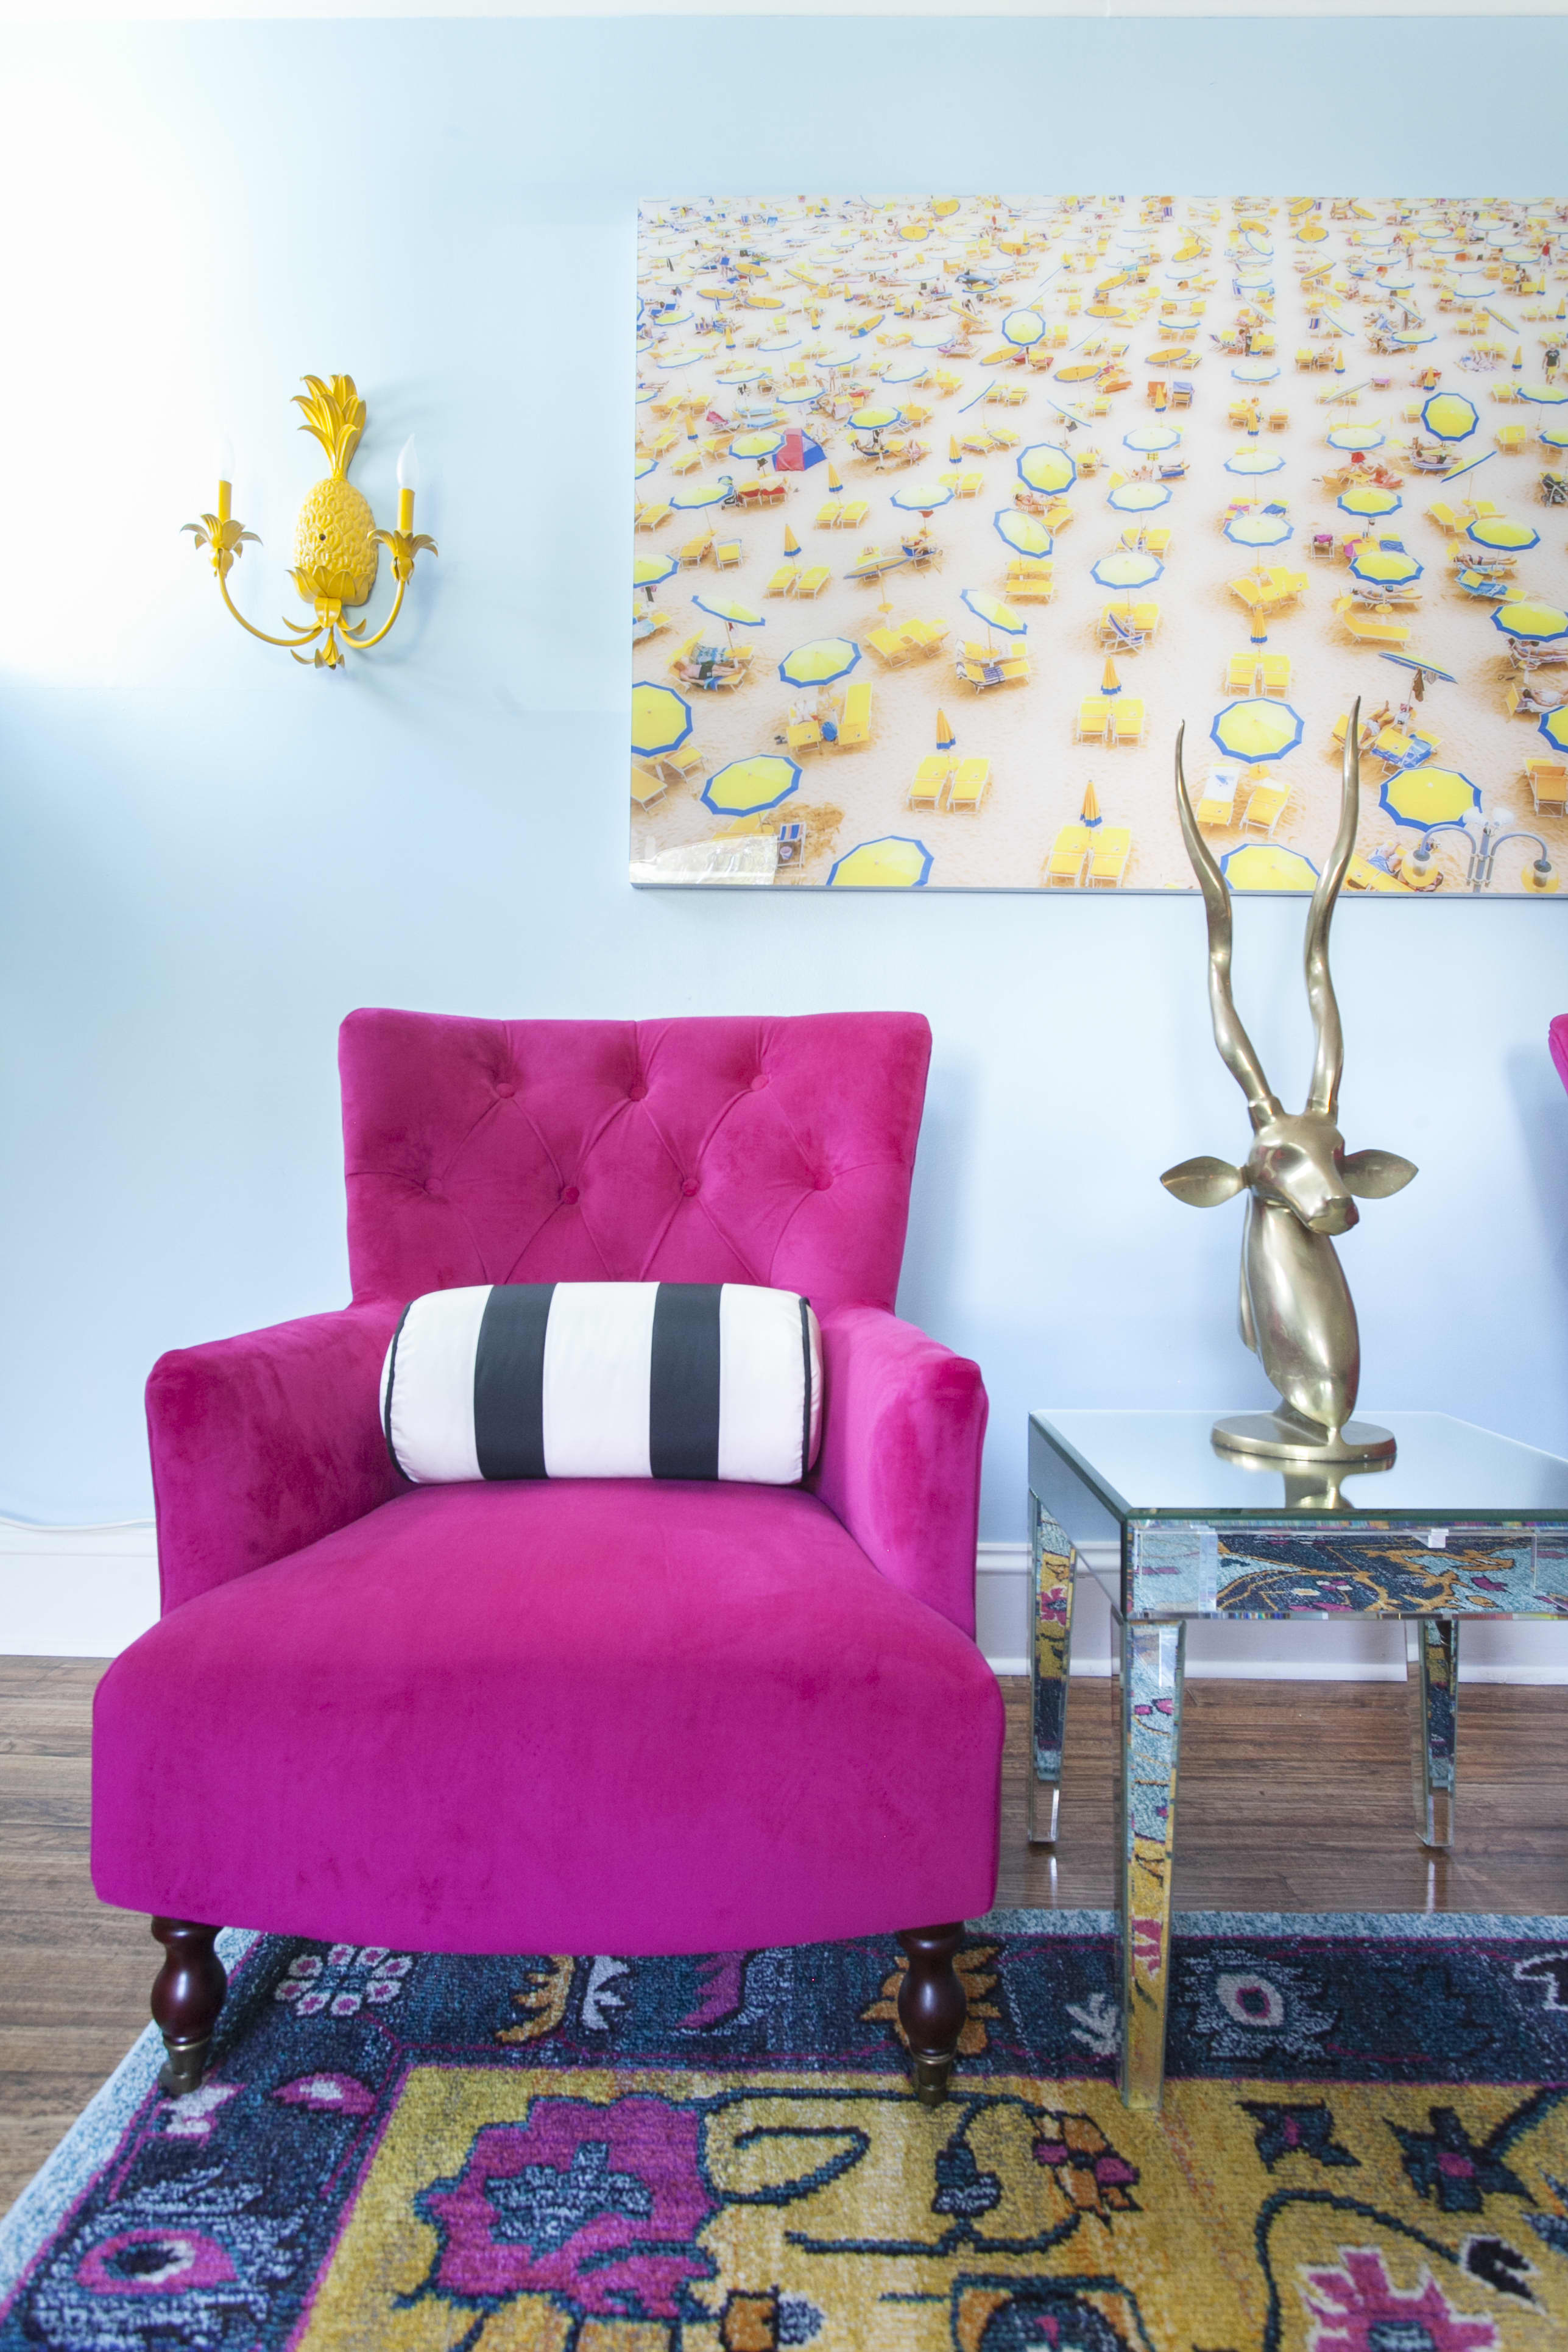 House Tour: A Baker's Bold Rental Home | Apartment Therapy